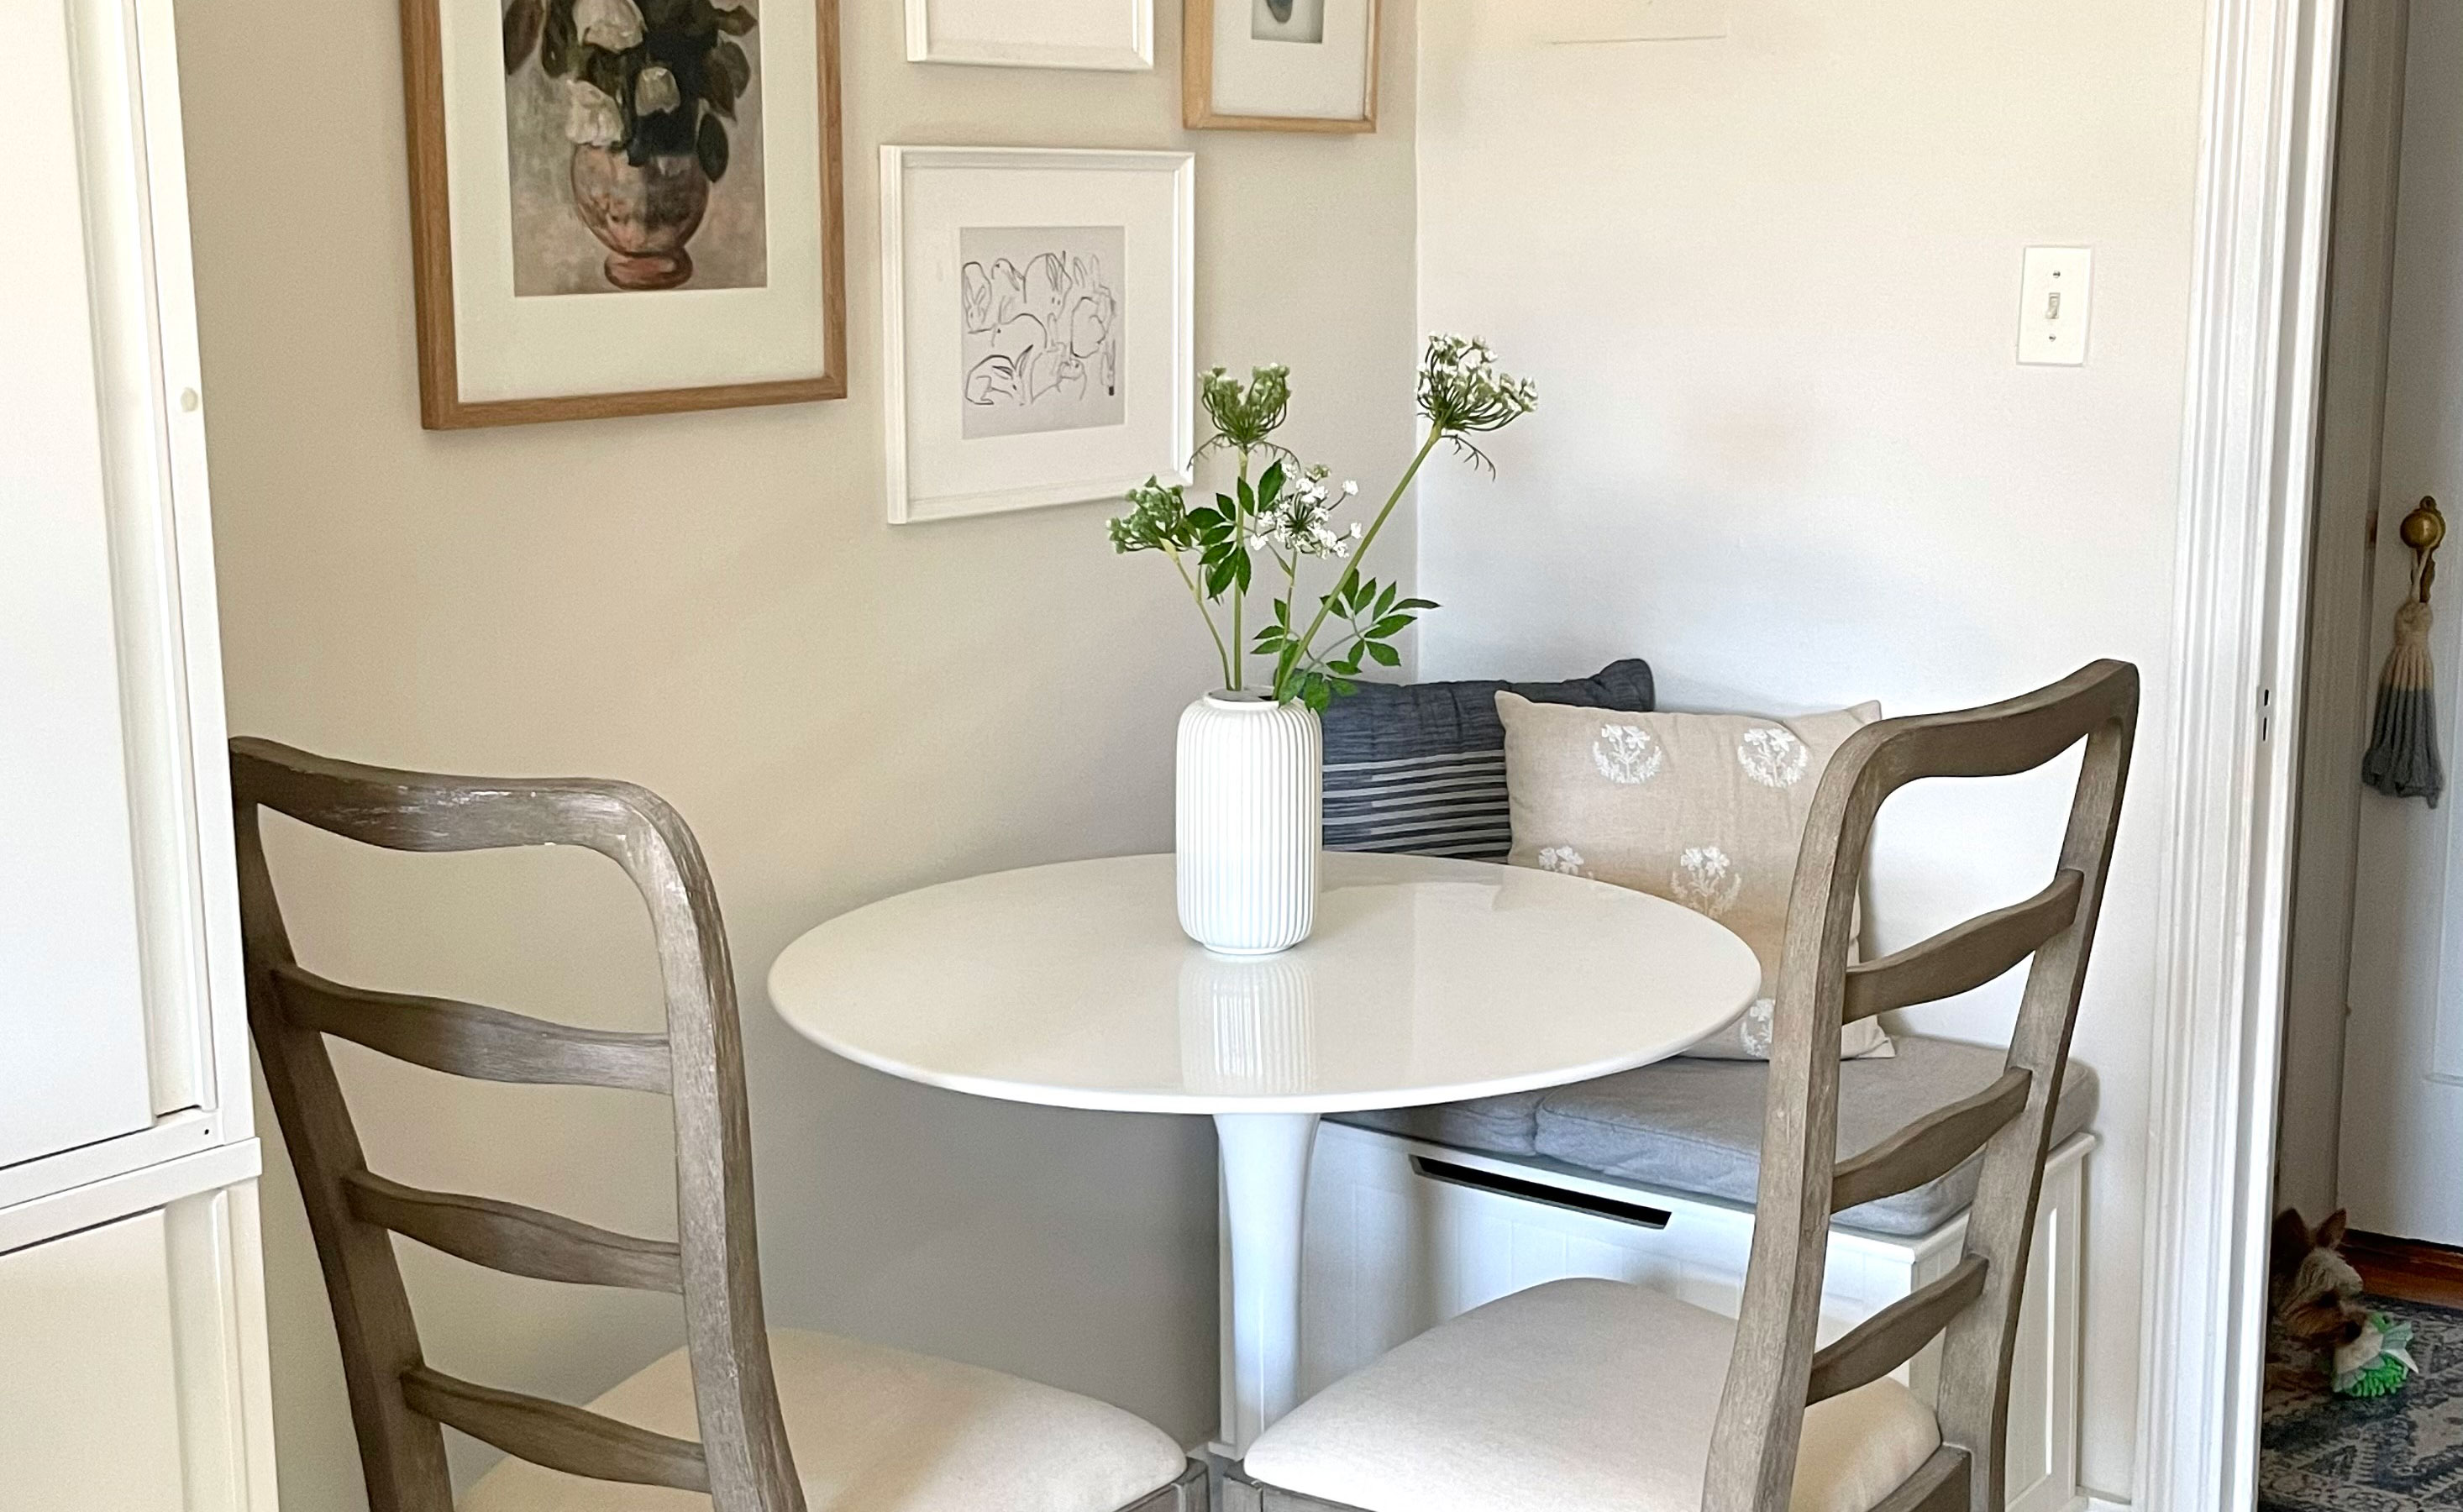 6 No Fail Tips to Design a Kitchen Breakfast Nook Like a Pro!